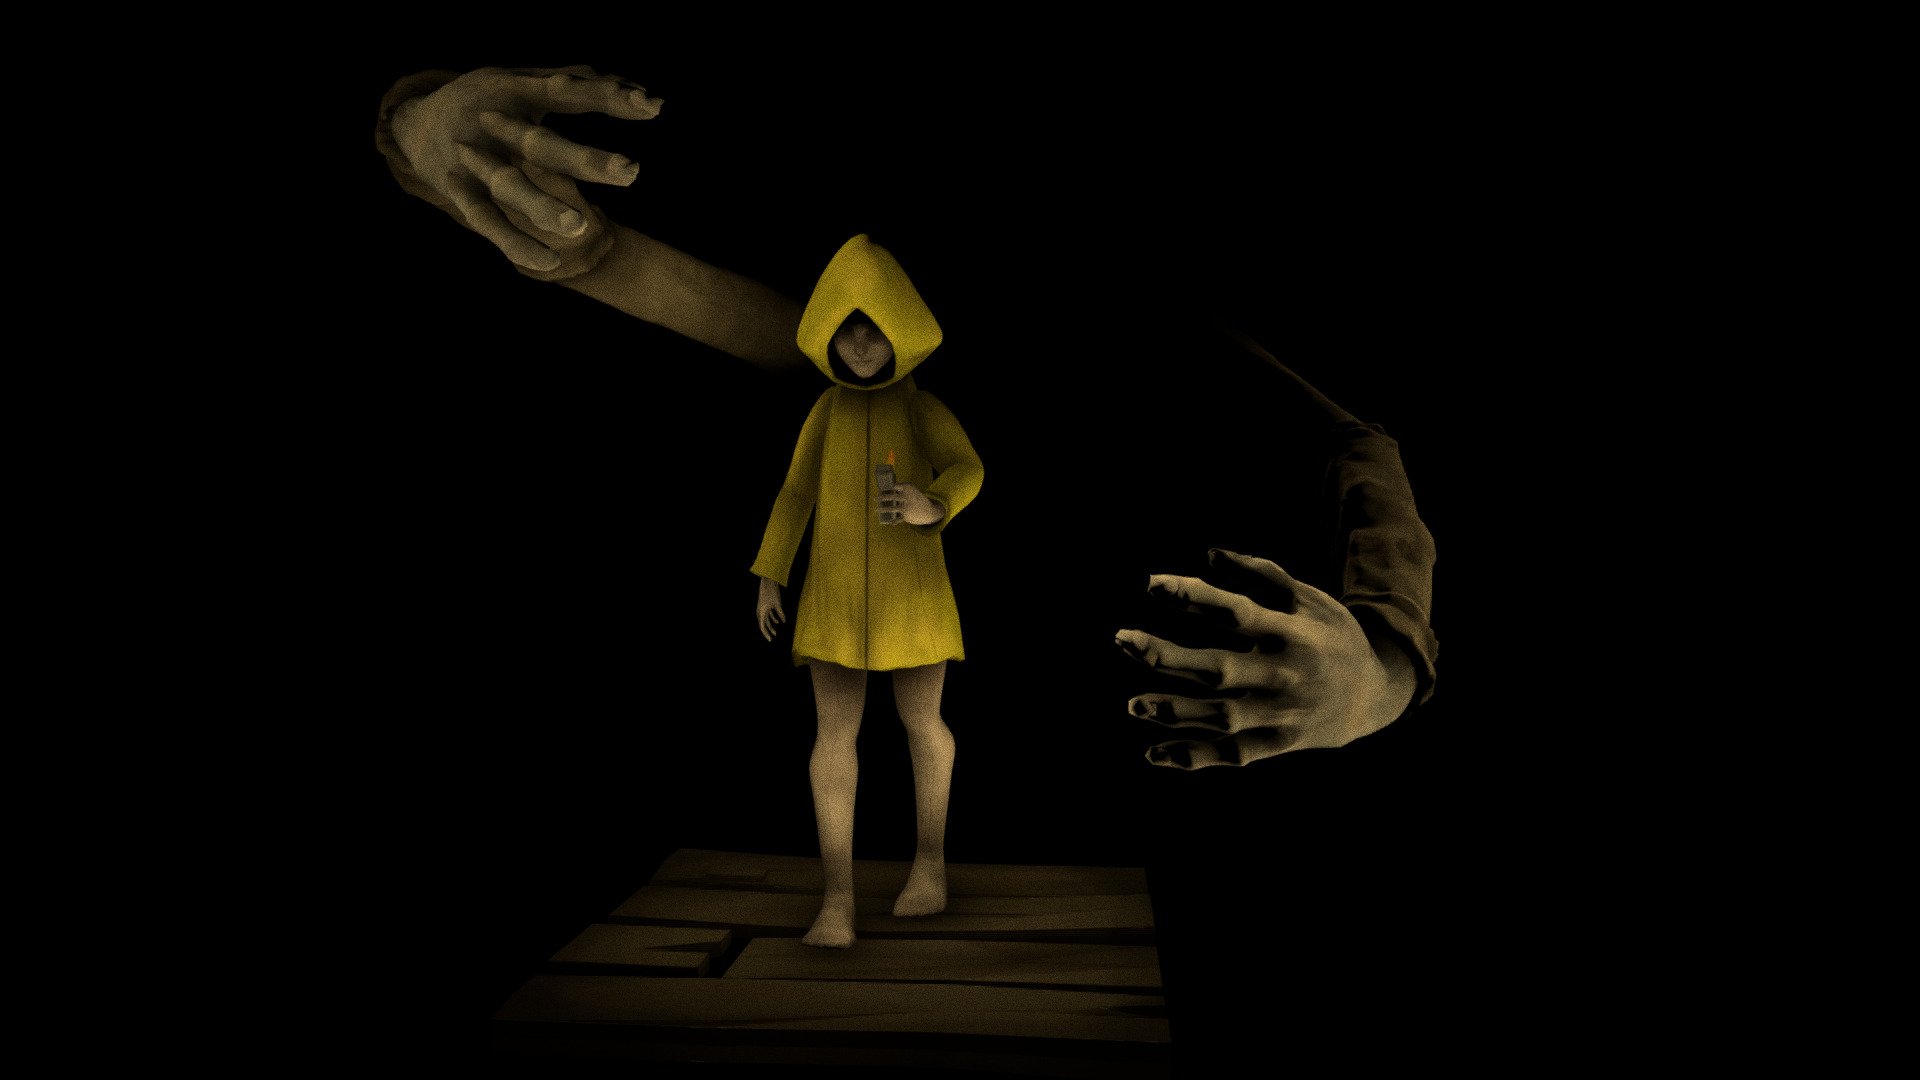 Nightmare 3D Models for Free - Download Free 3D ·